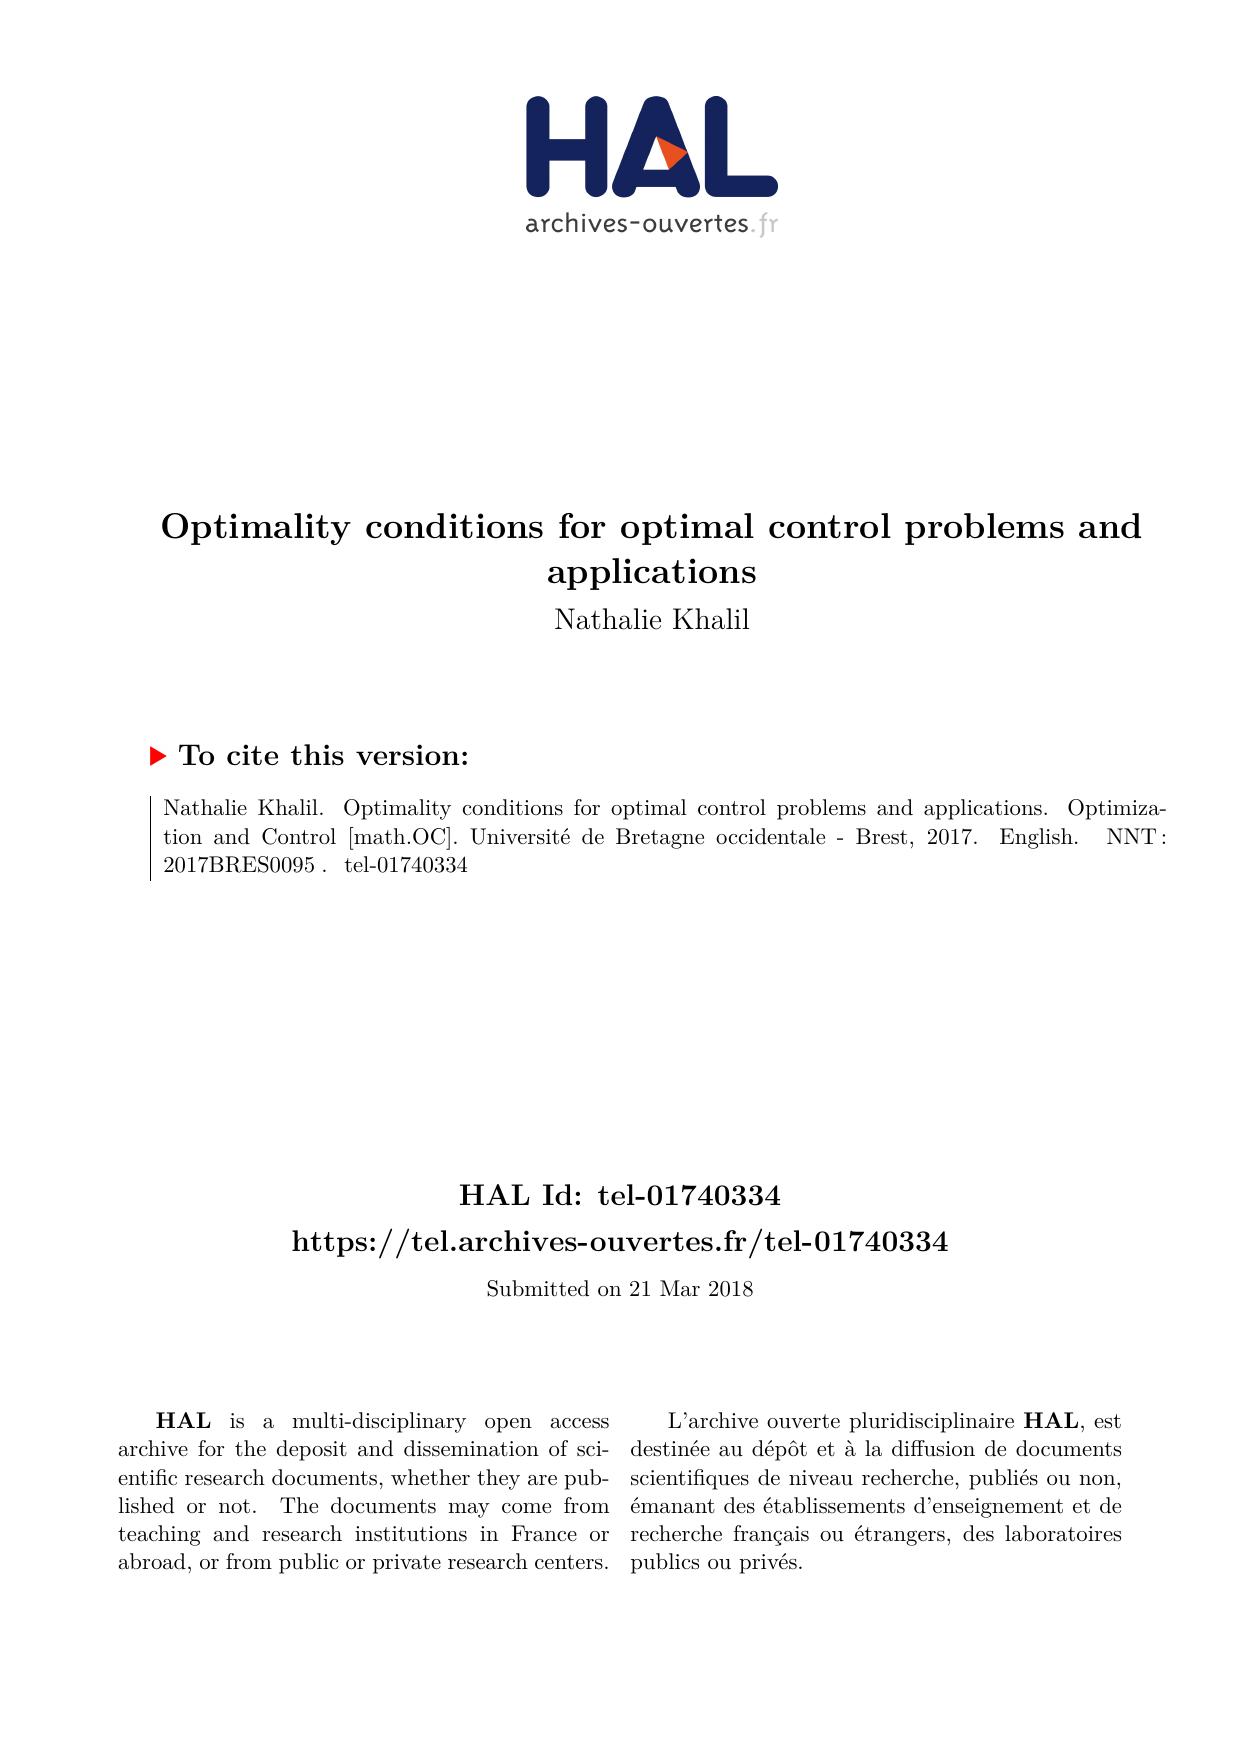 Optimality conditions for optimal control problems and applications